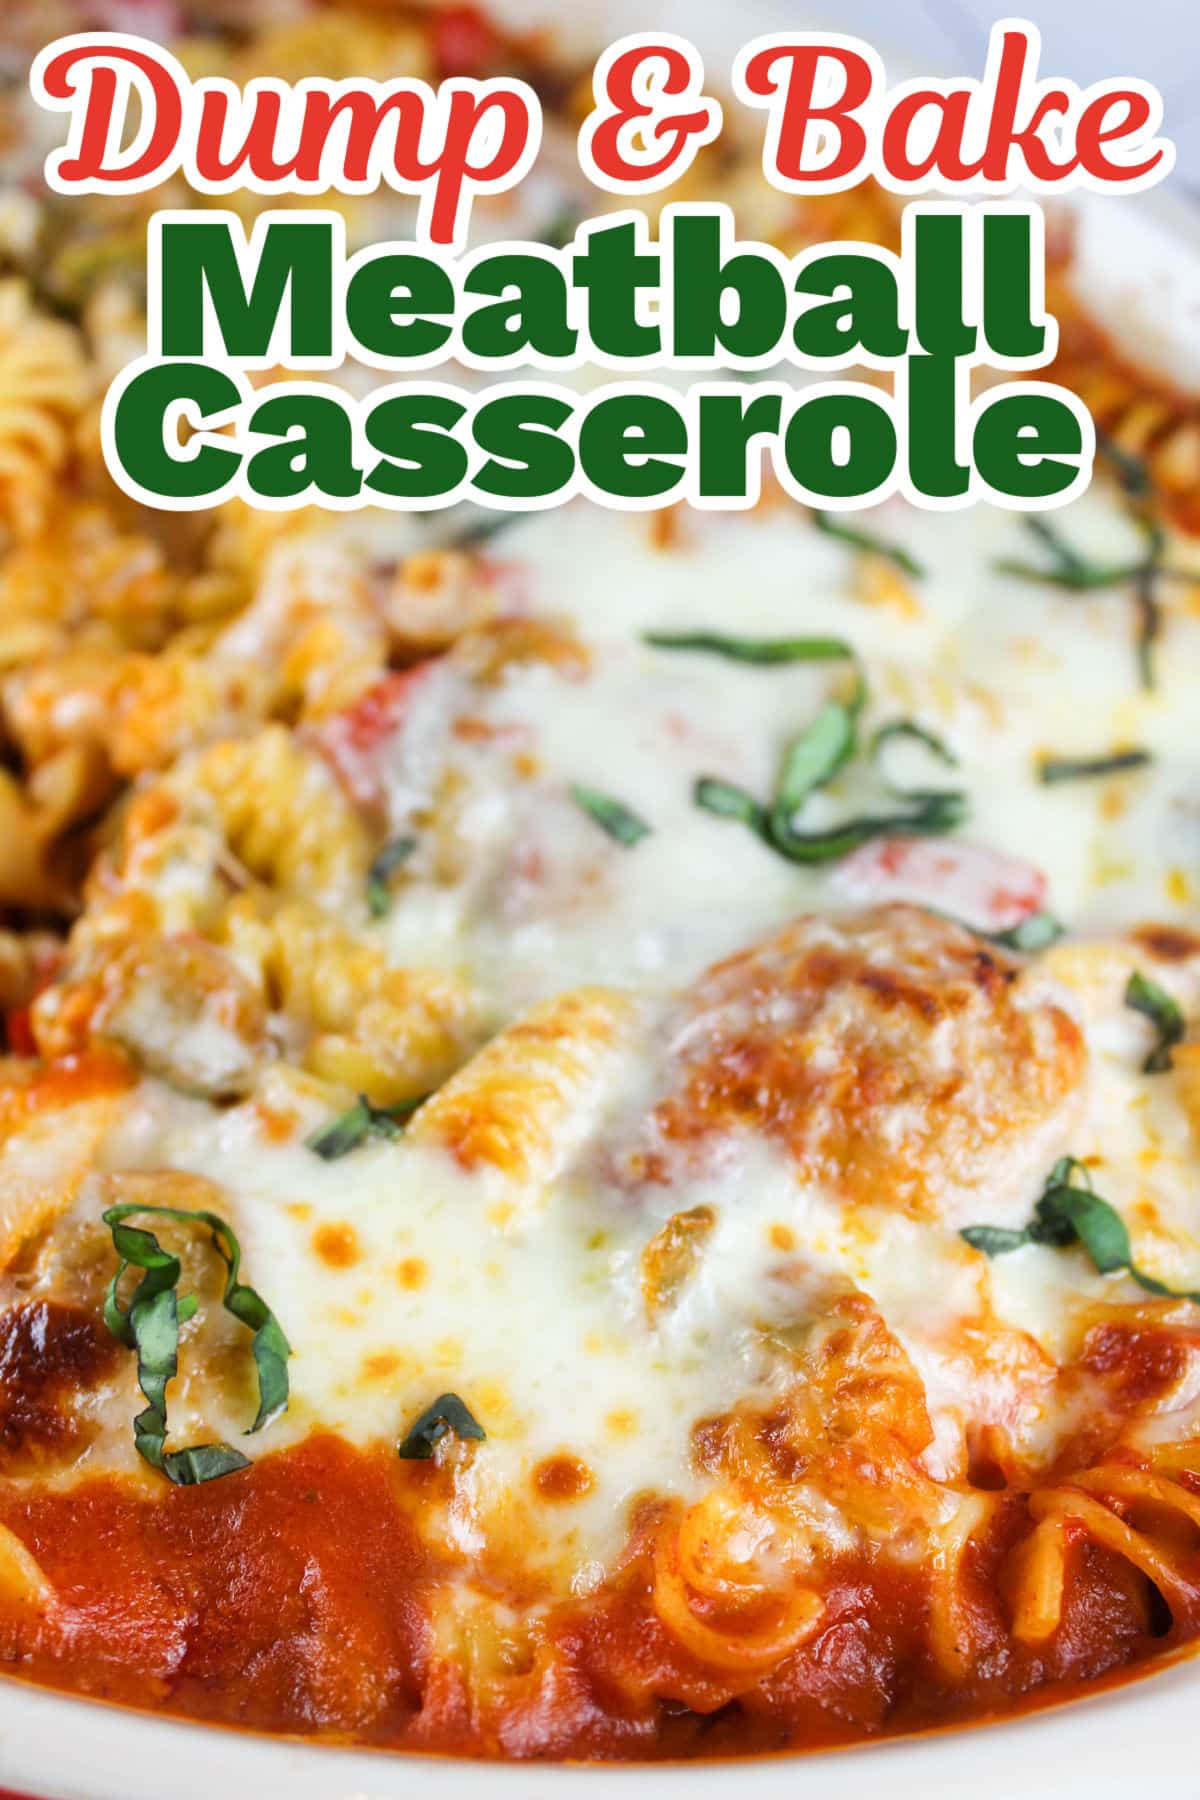 Dump and Bake Meatball Casserole is great because it's quick and easy to make - and then you have an amazing cheesy delicious casserole! You can't get any easier than this recipe with all the Italian flavor you love! via @foodhussy